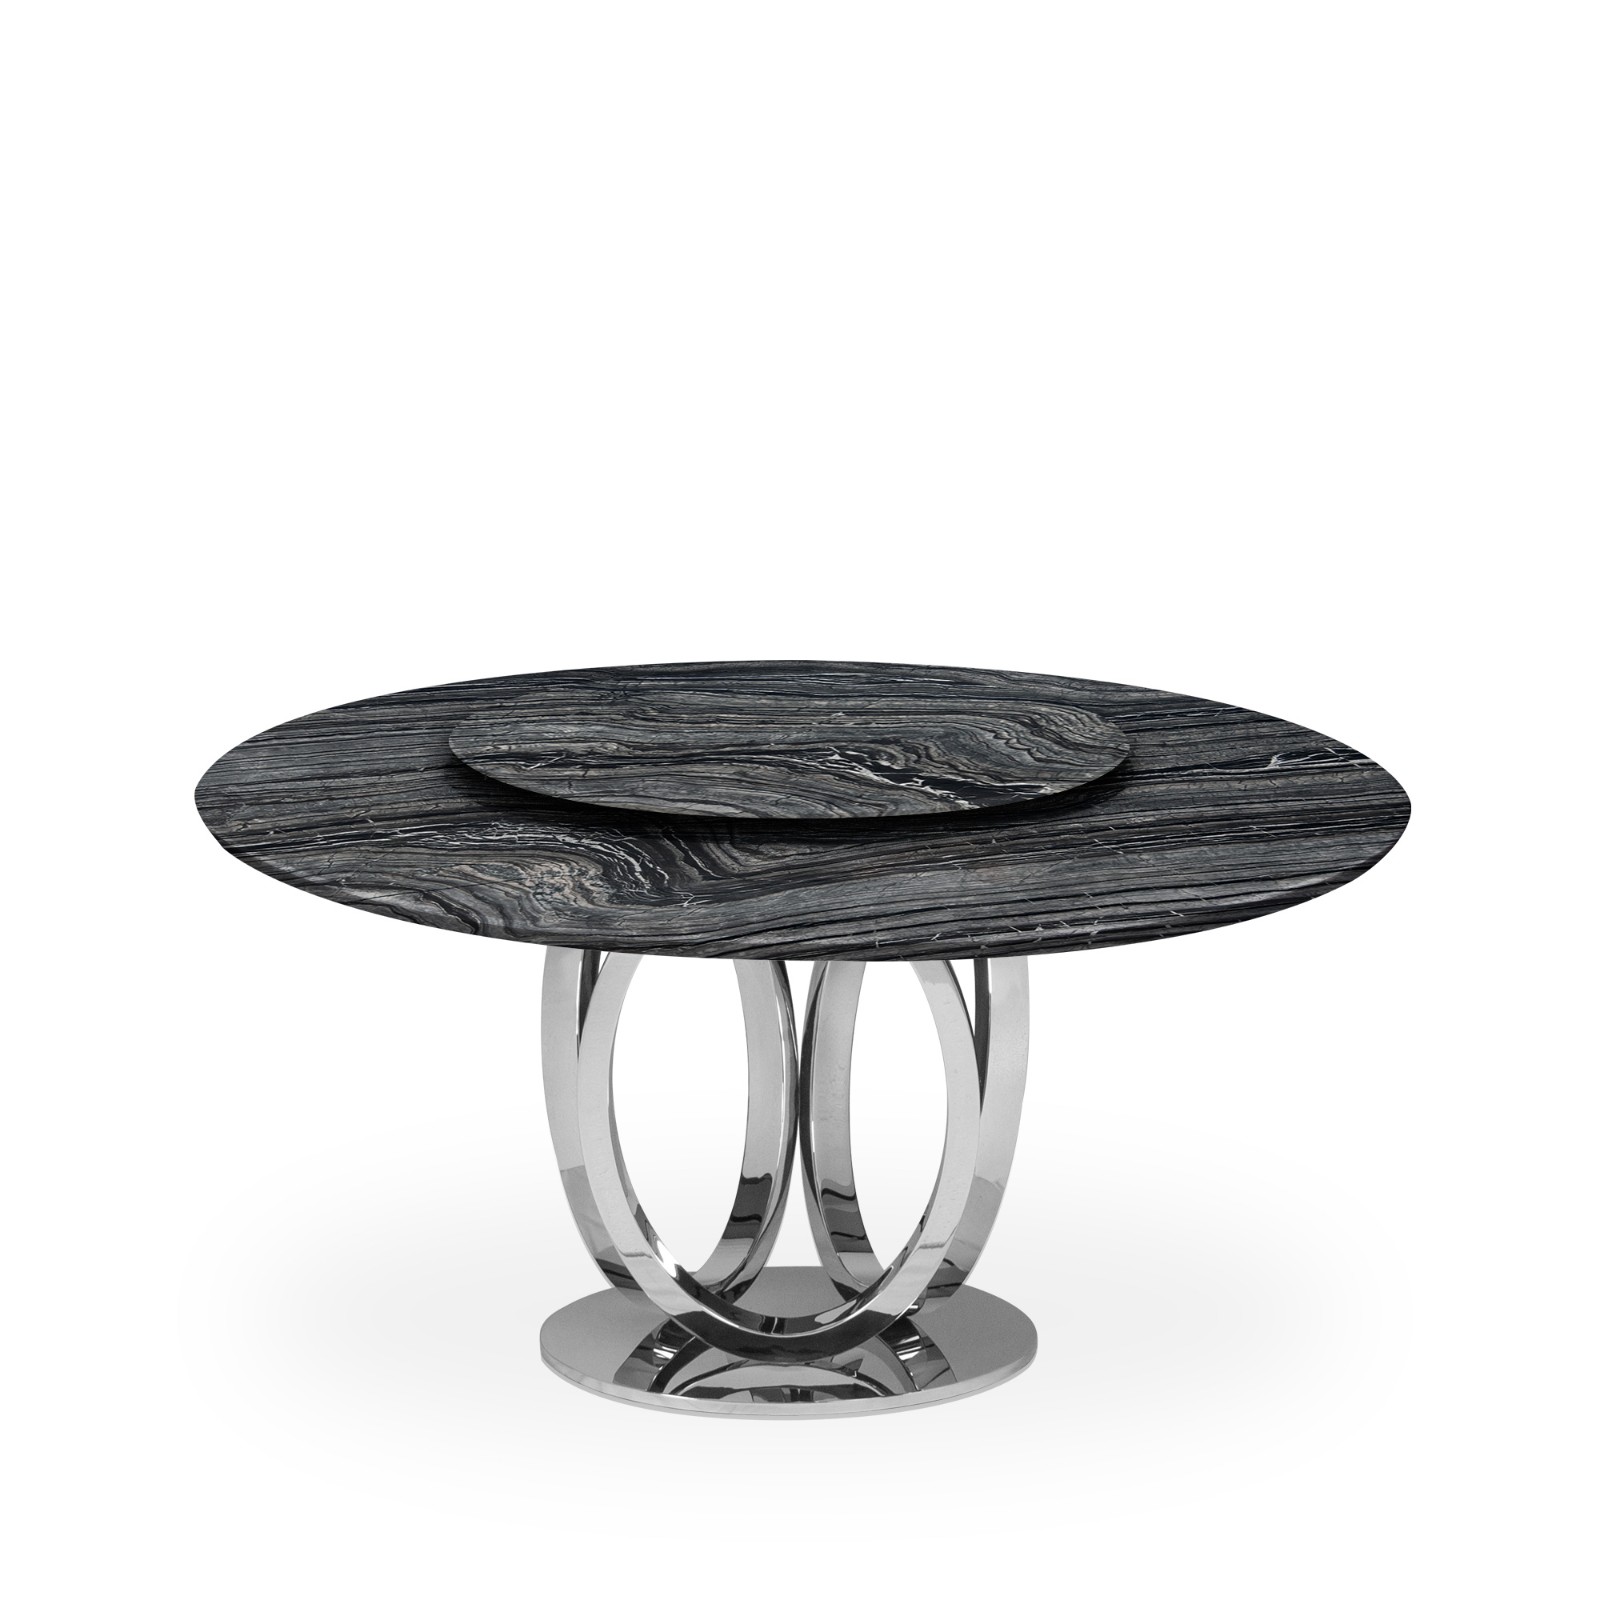 Kahlo O 2 | Art Series | Decasa Marble Marble Dining Table